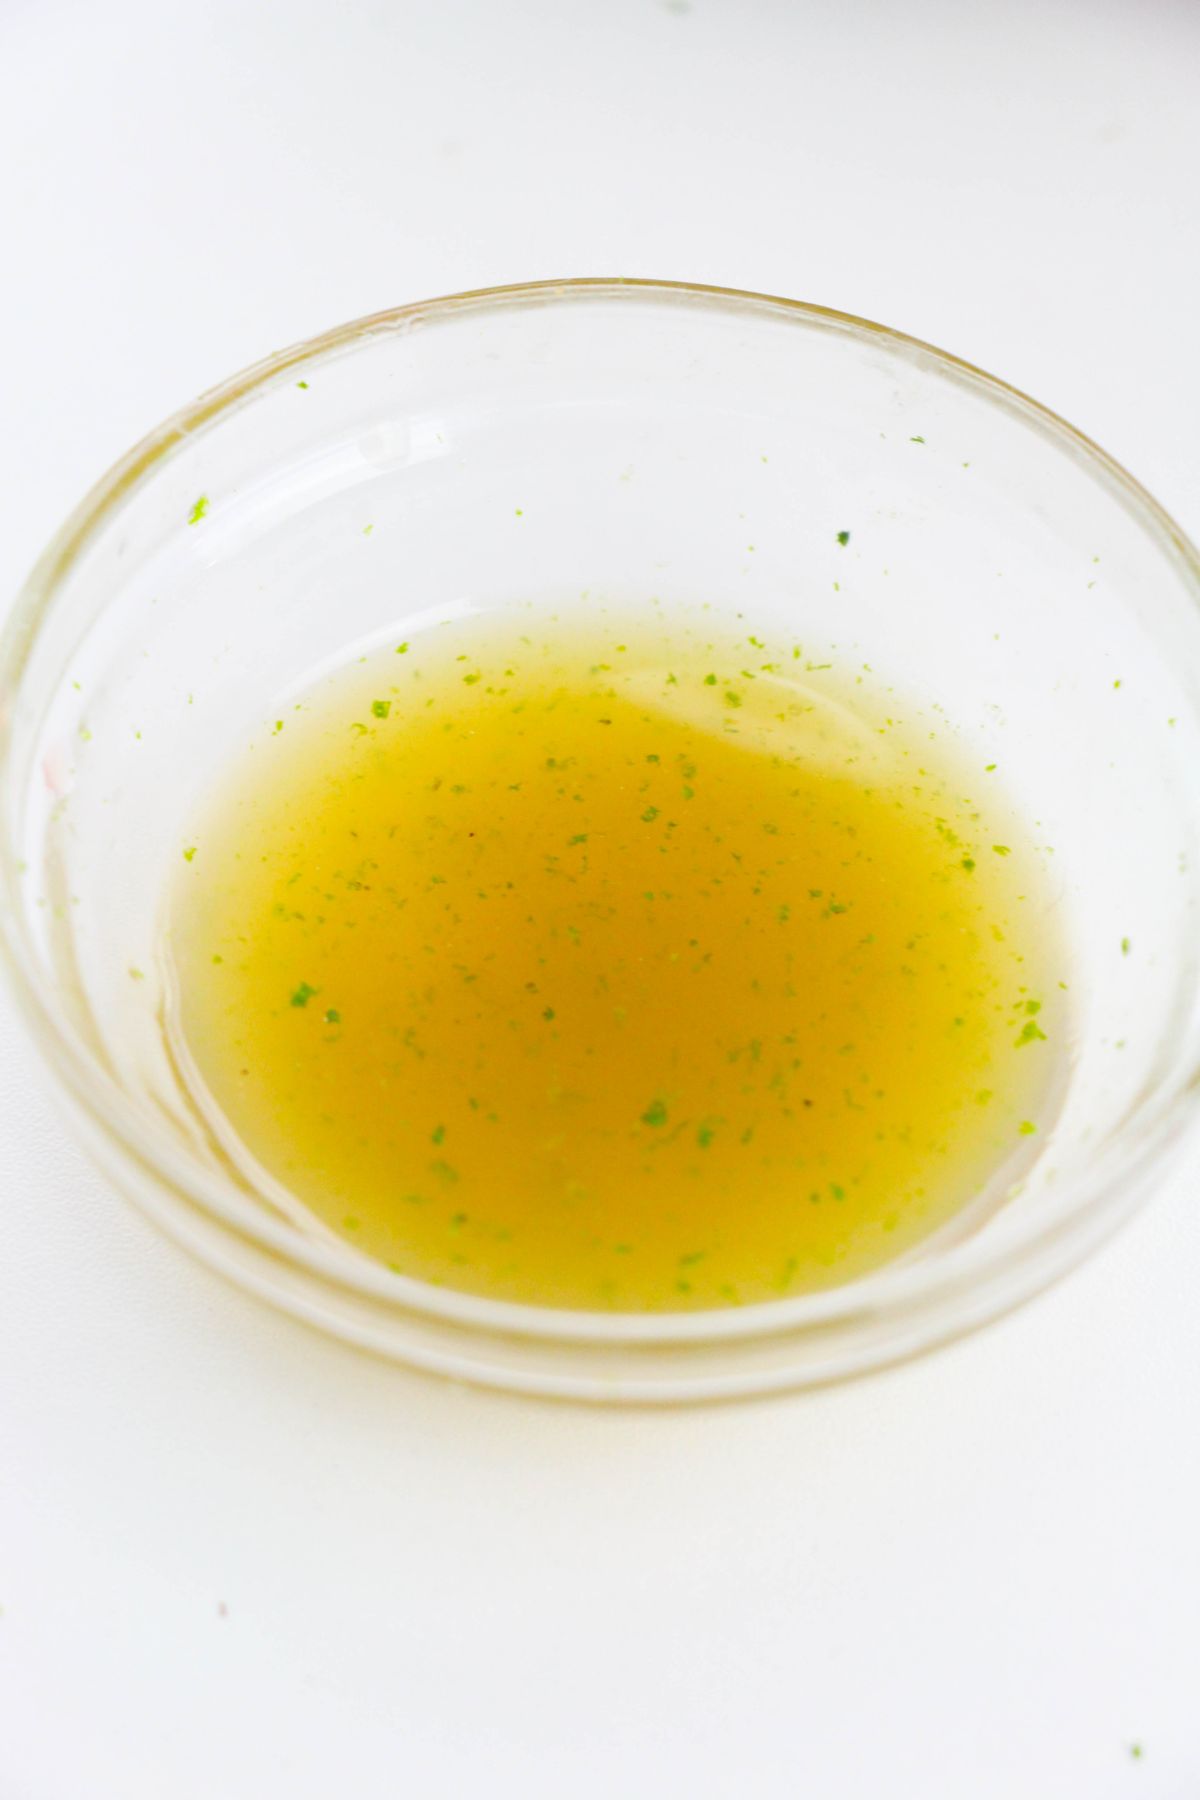 Honey, lime juice, and lime zest in a small glass bowl